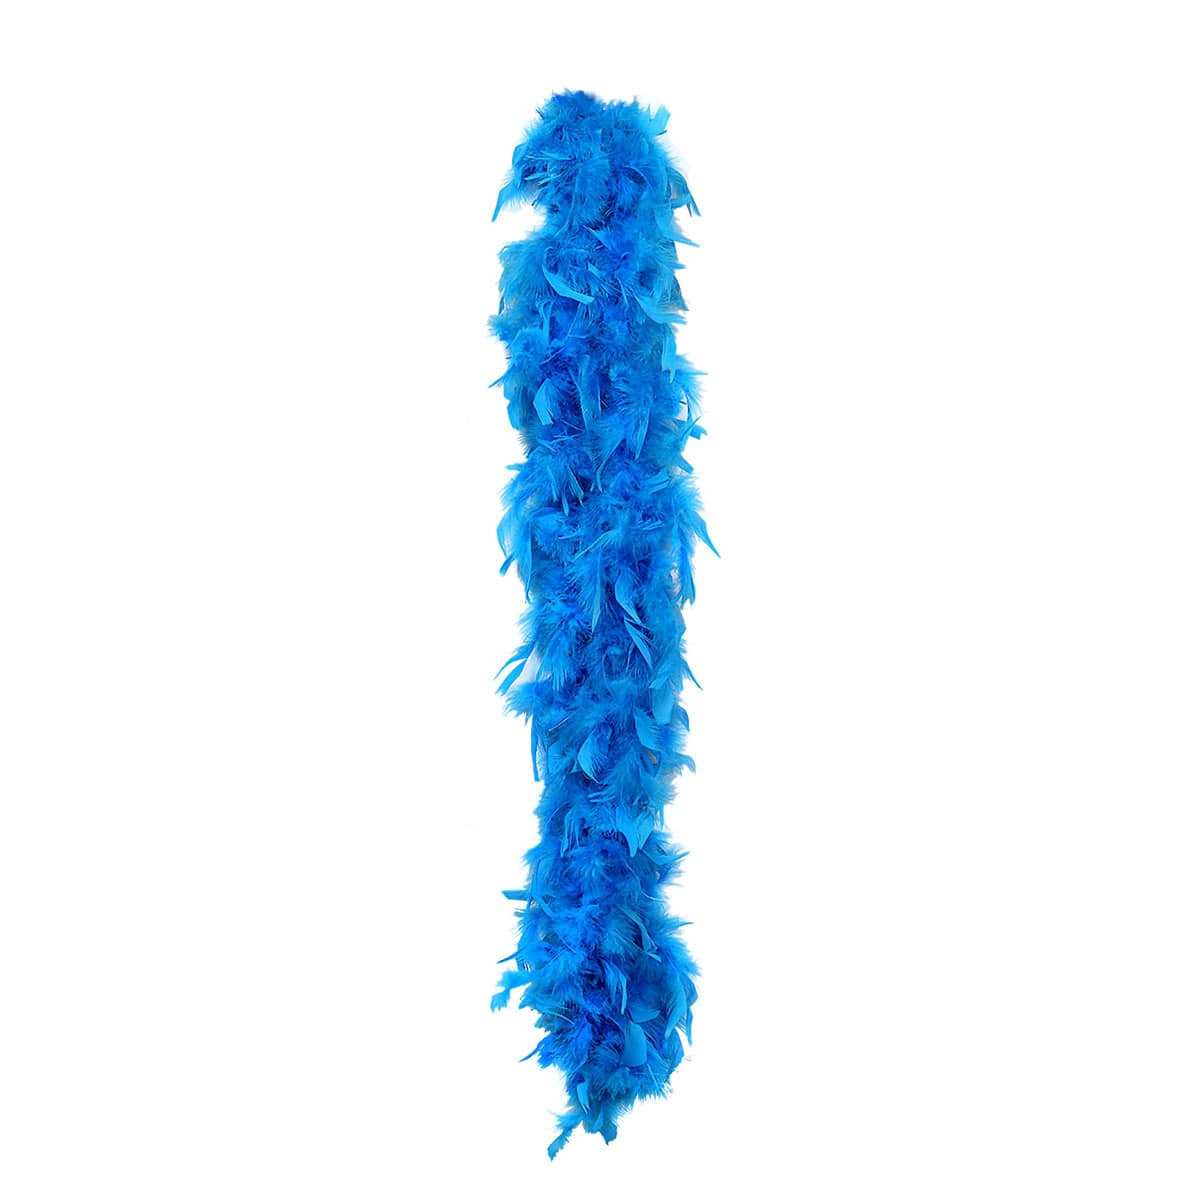 Feather Boa in Hot Pink,Pink,Black,White,Red,Turqoise, Lime and